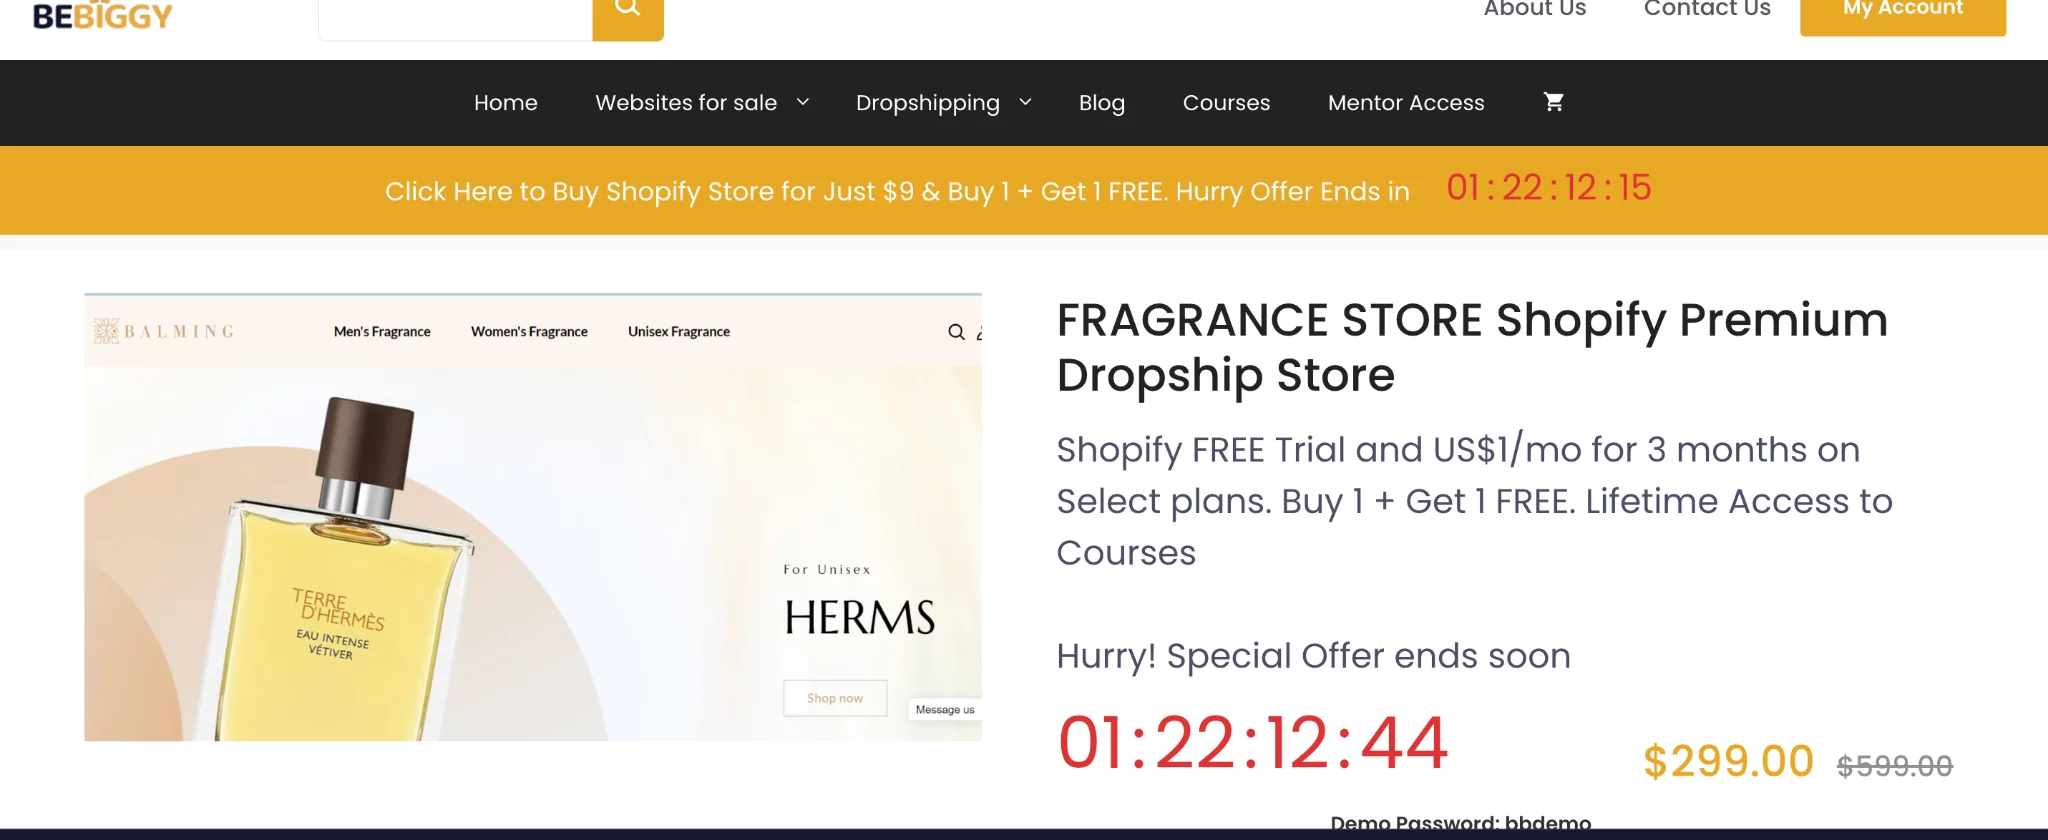 Where to buy Premade Shopify fragrance Stores?